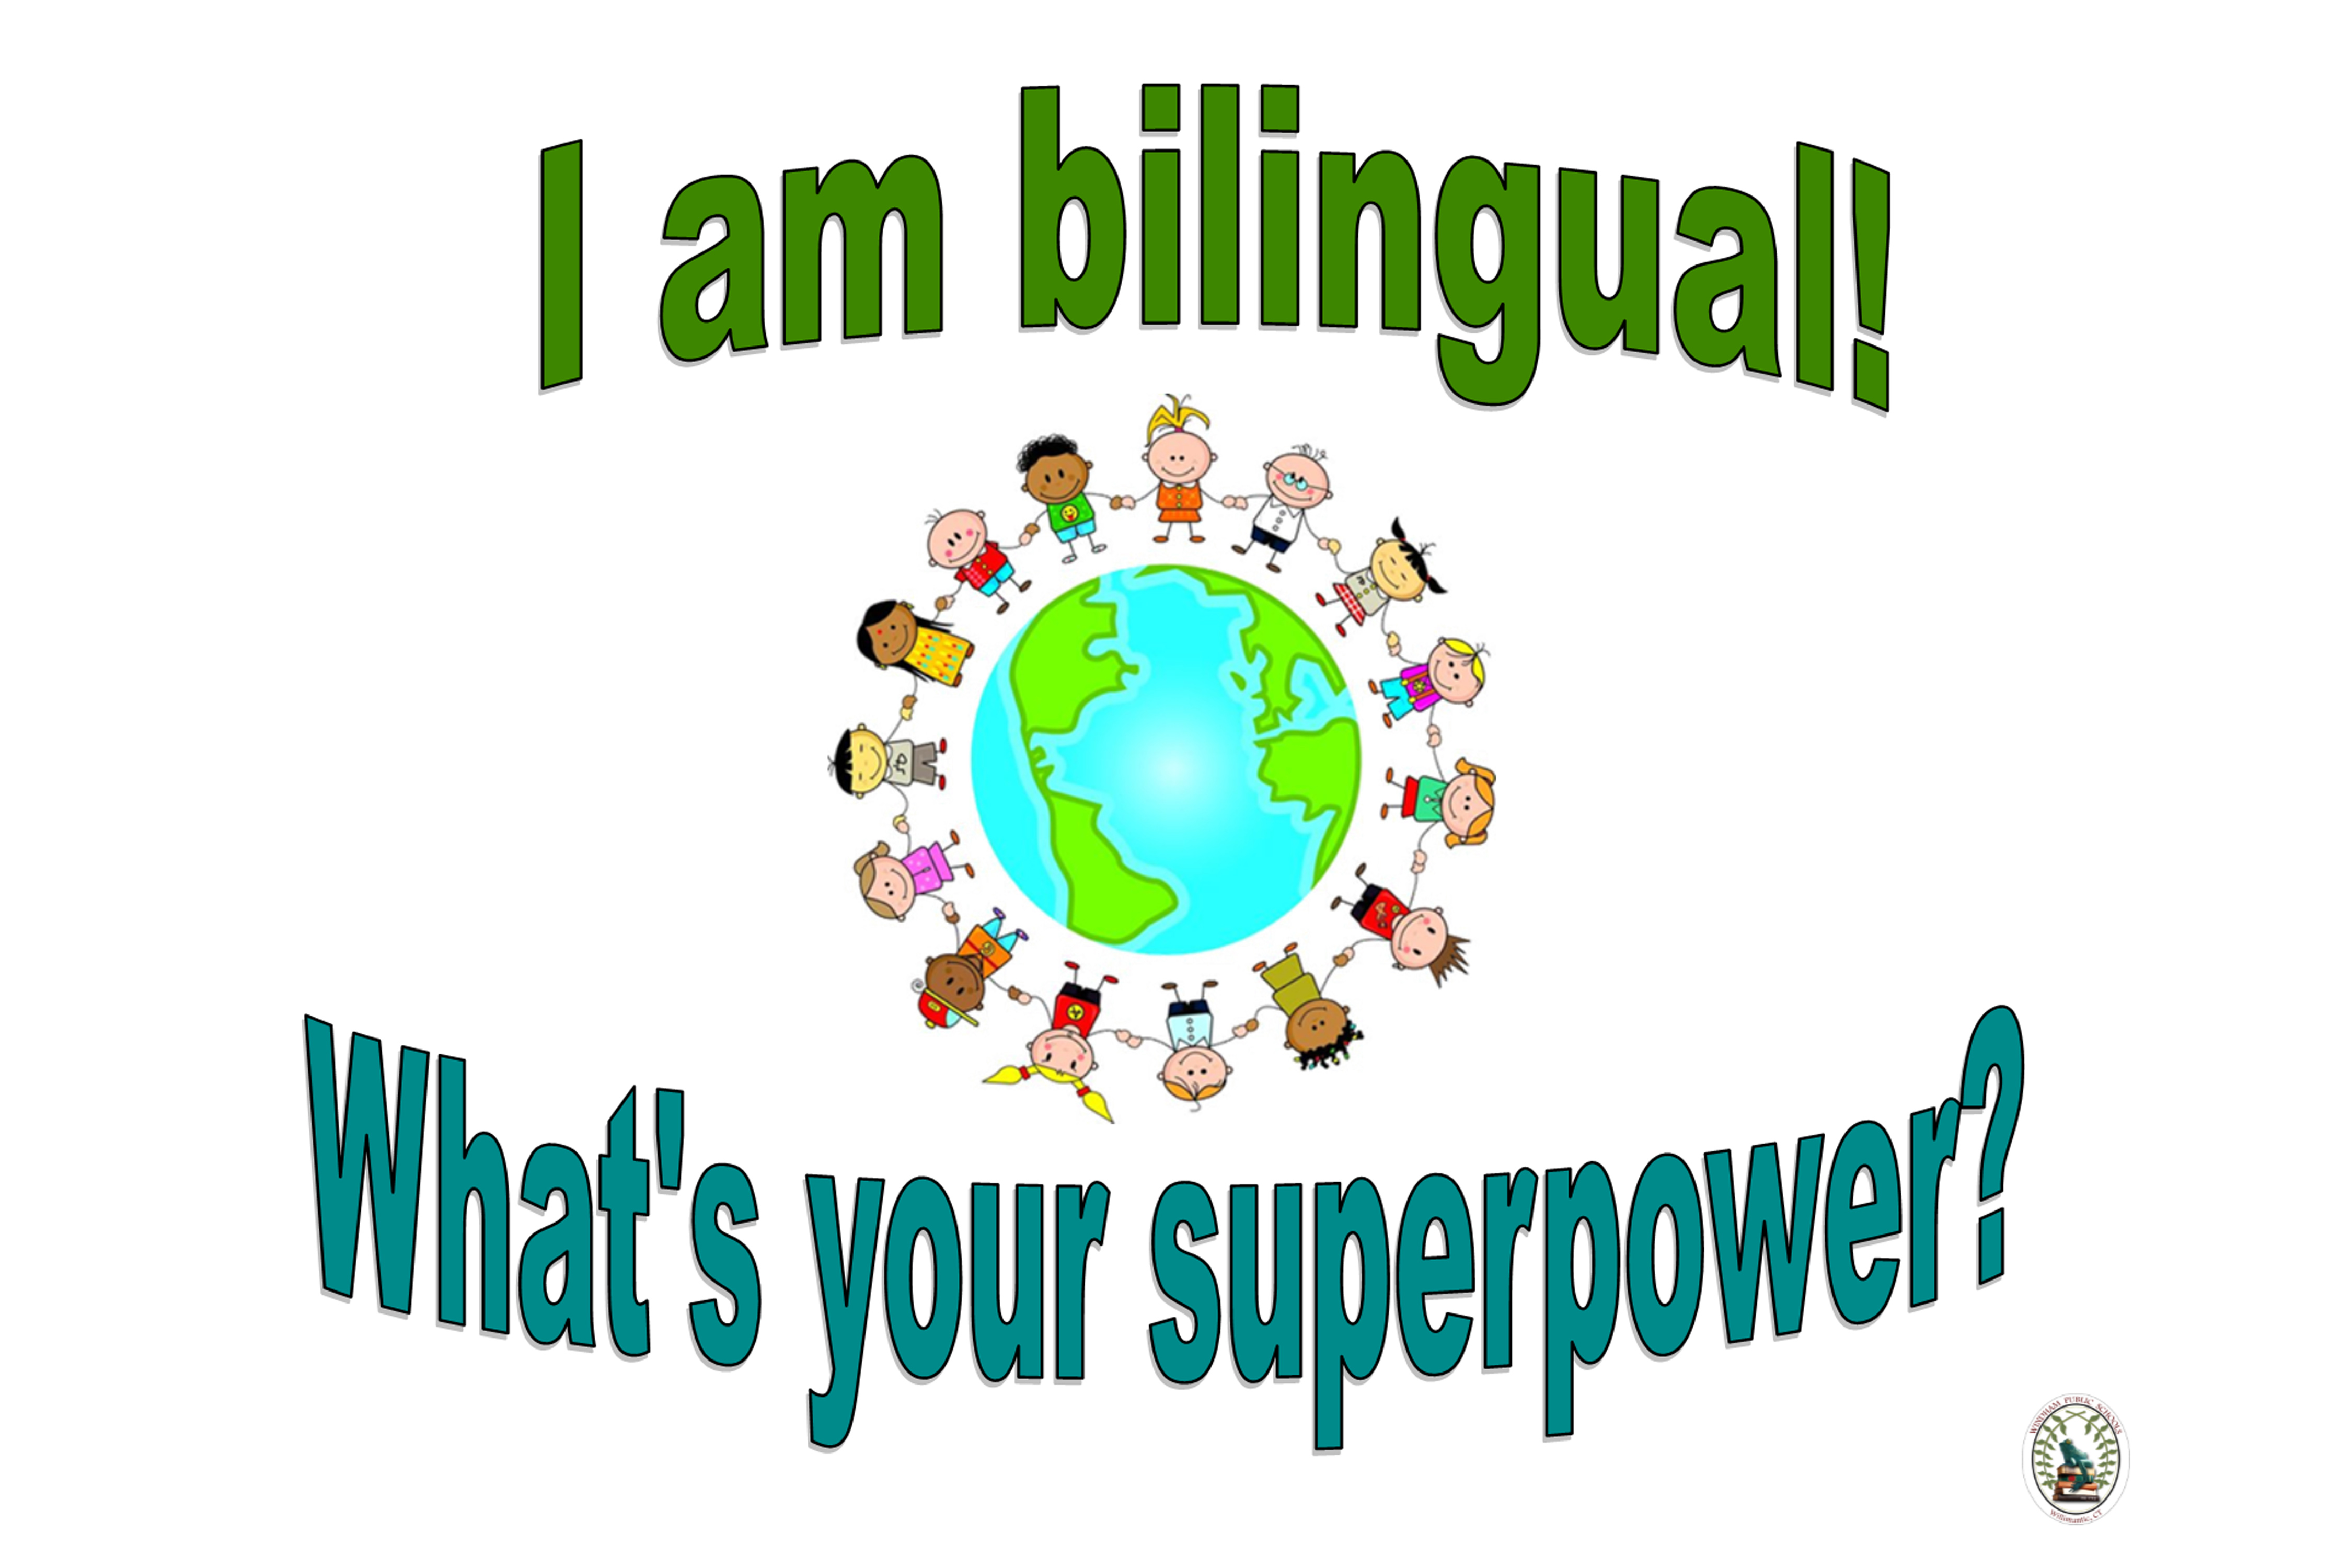 I am bilingual! What's your superpower?